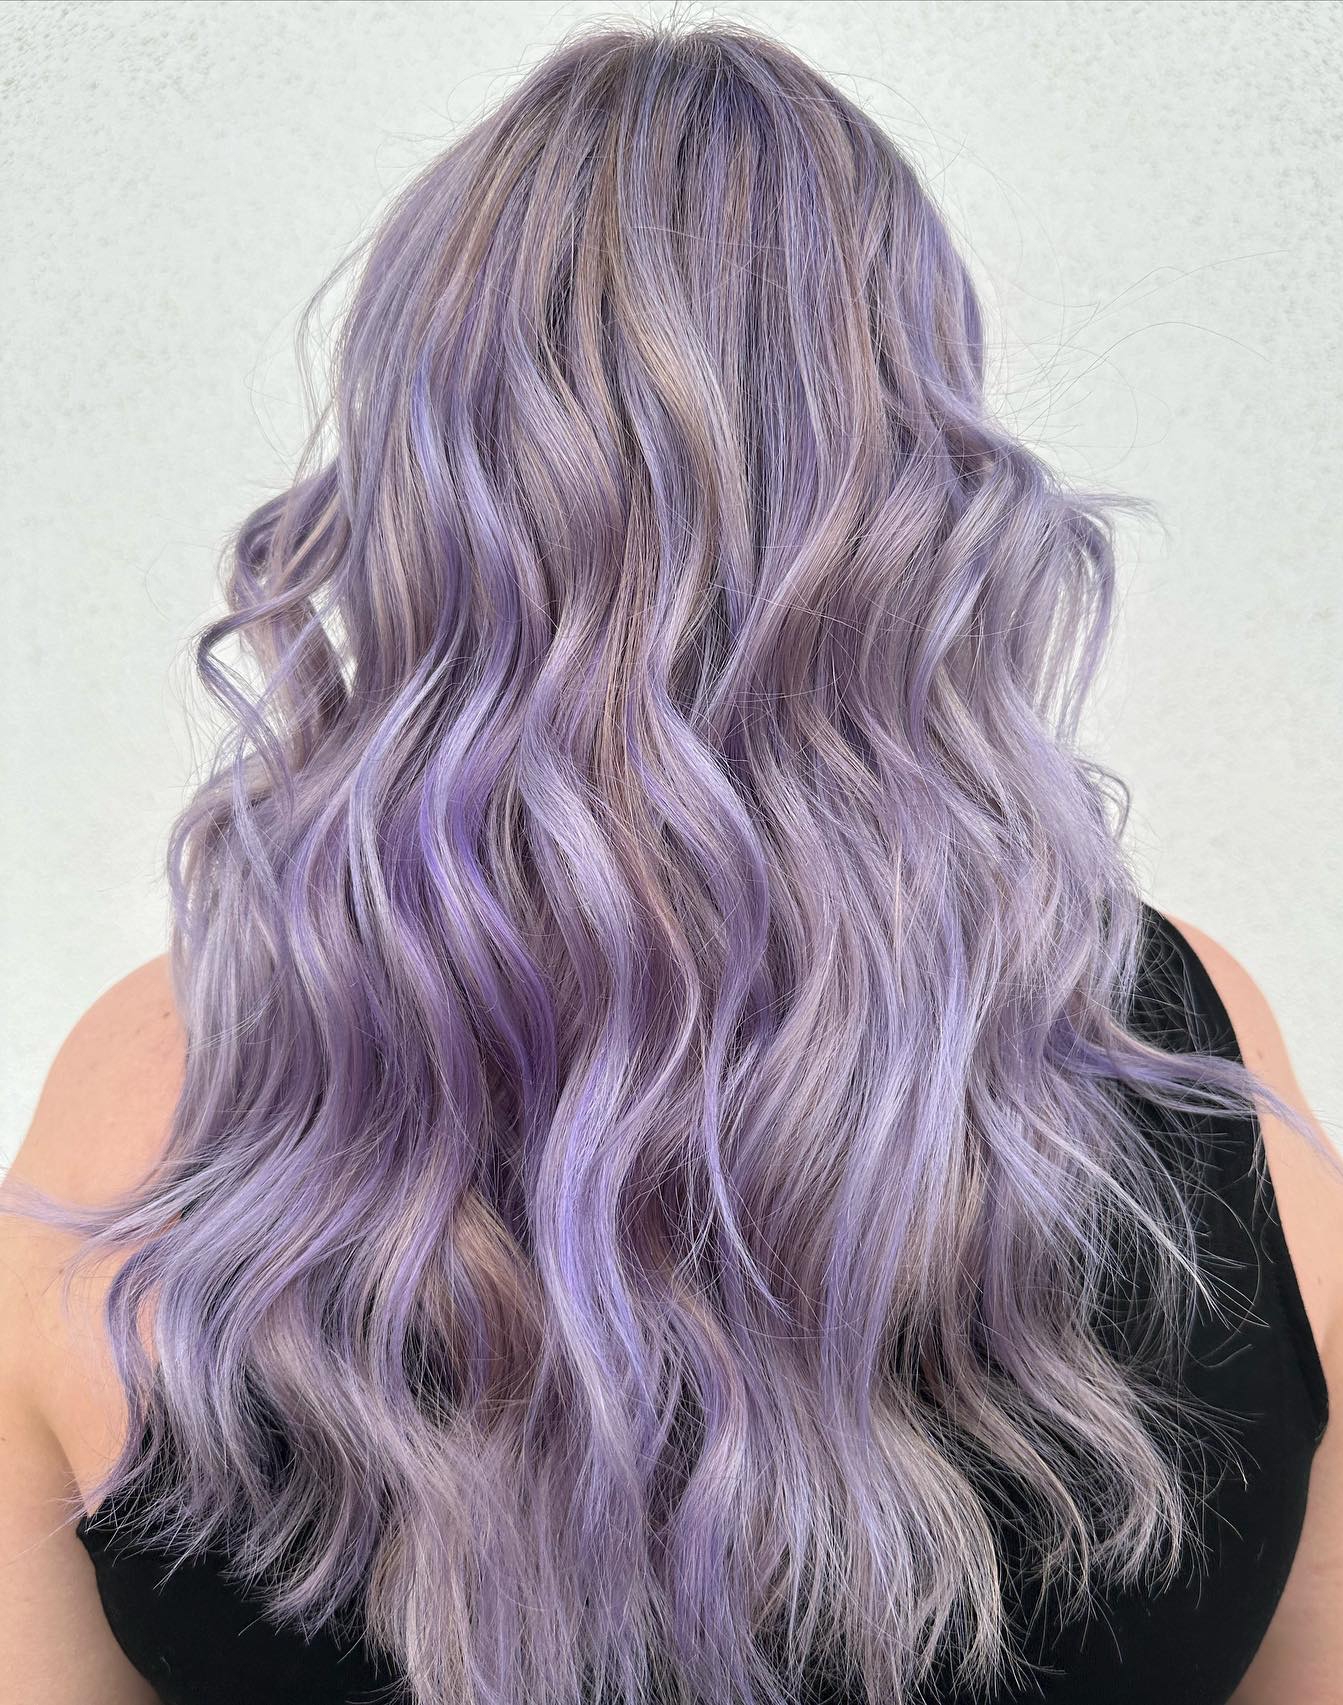 Long Wavy Blonde Hair with Lavender Highlights